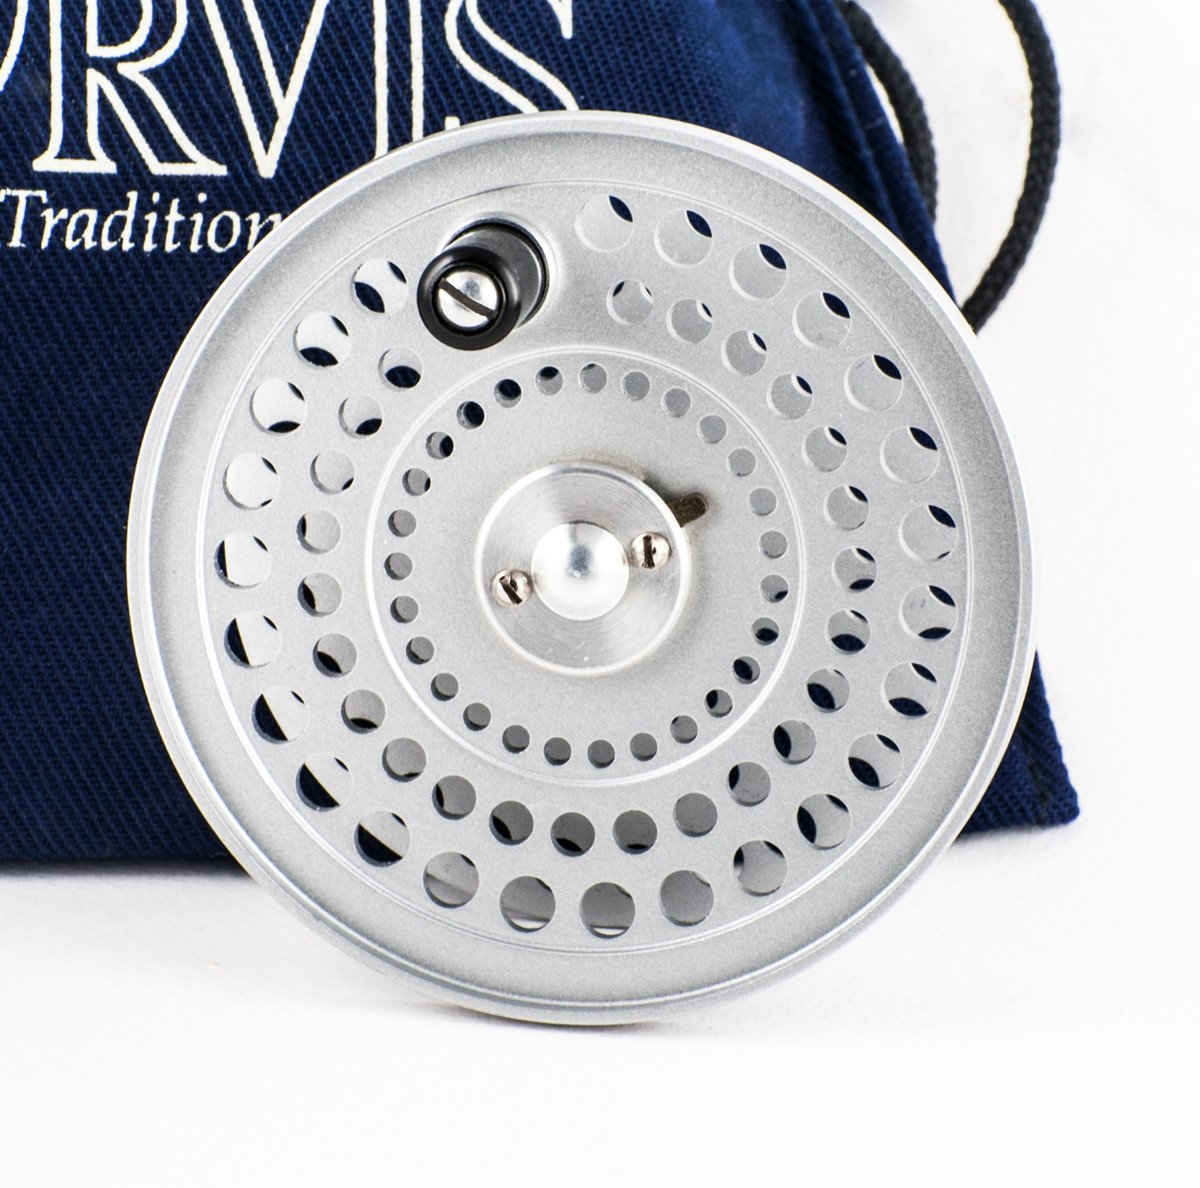 Orvis Anniversary CFO III fly reel and spare spool - Limited Edition -  Spinoza Rod Company